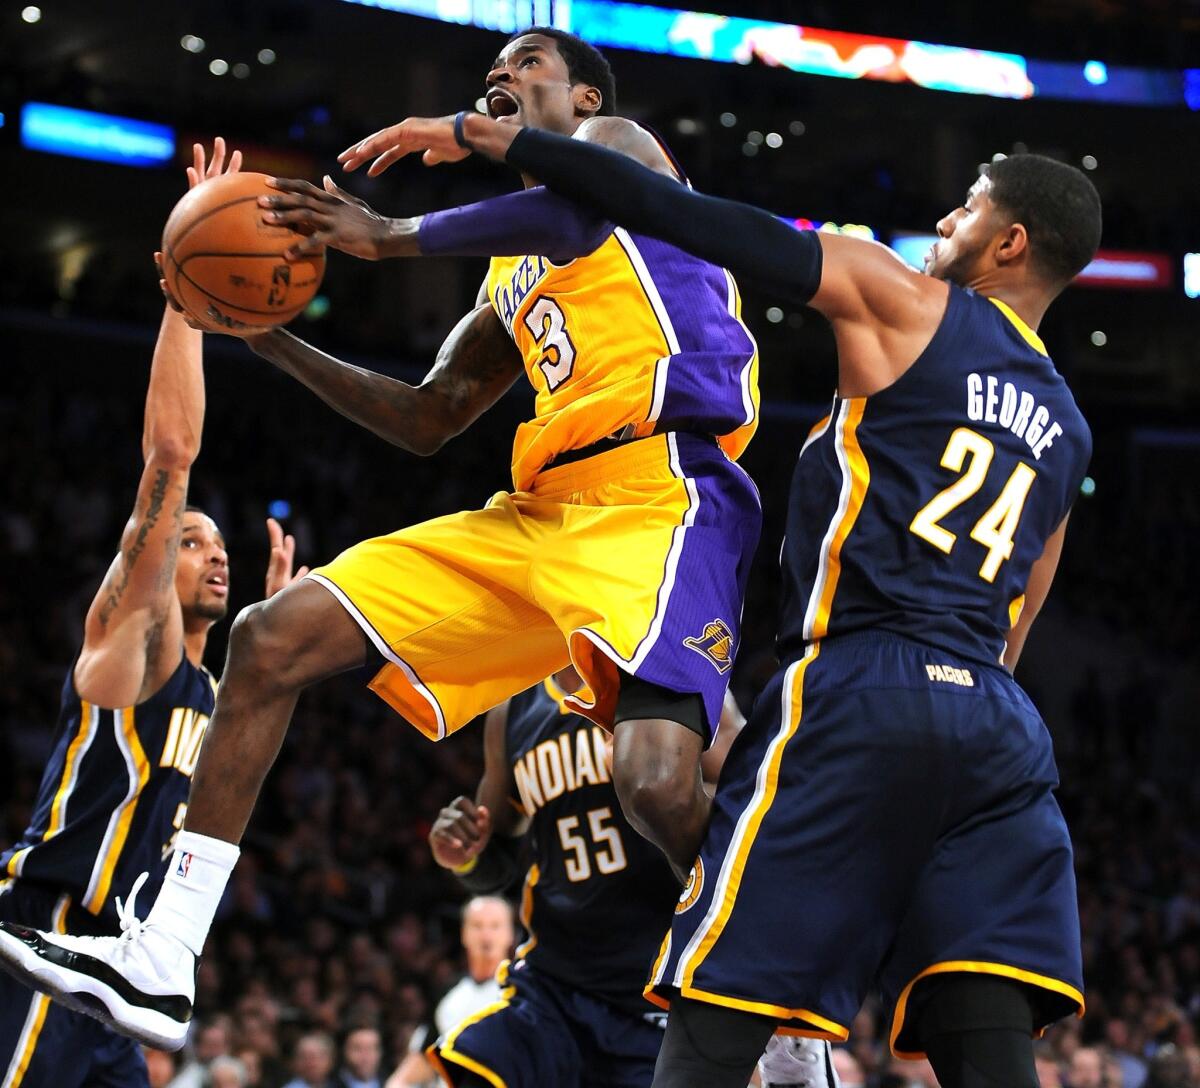 Lakers point guard Manny Harris drives to the basket in front of Indiana Pacers forward Paul George during the Lakers' 104-92 loss at Staples Center.